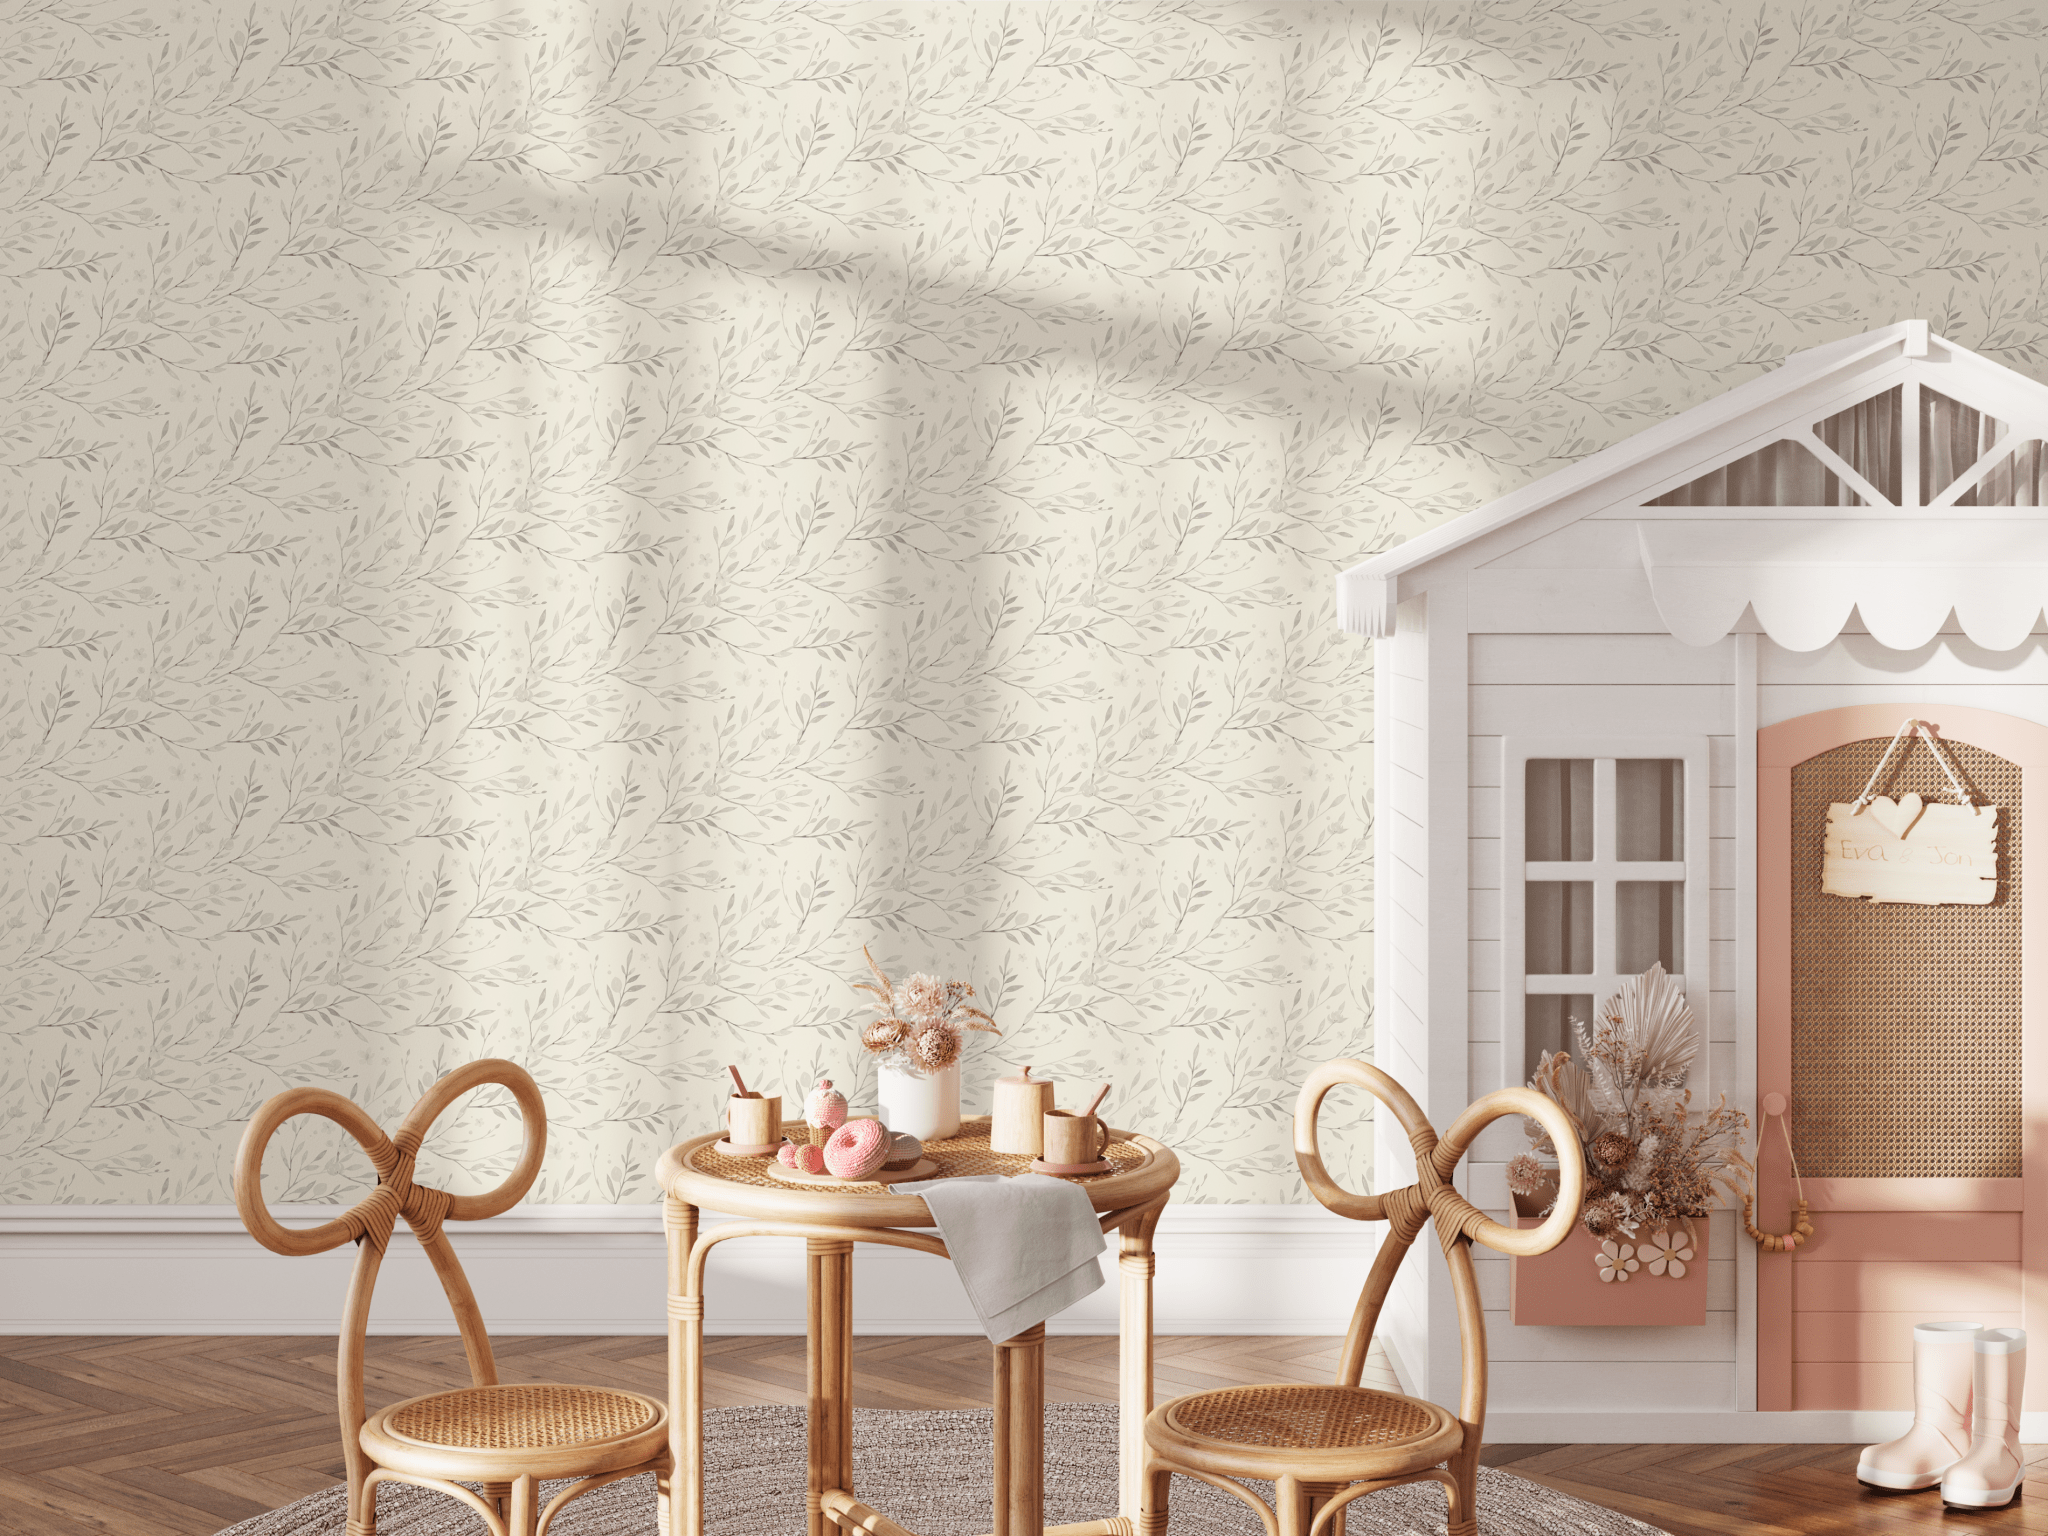 Aesthetic childrens playroom featuring the cutest peel and stick floral wallpaper